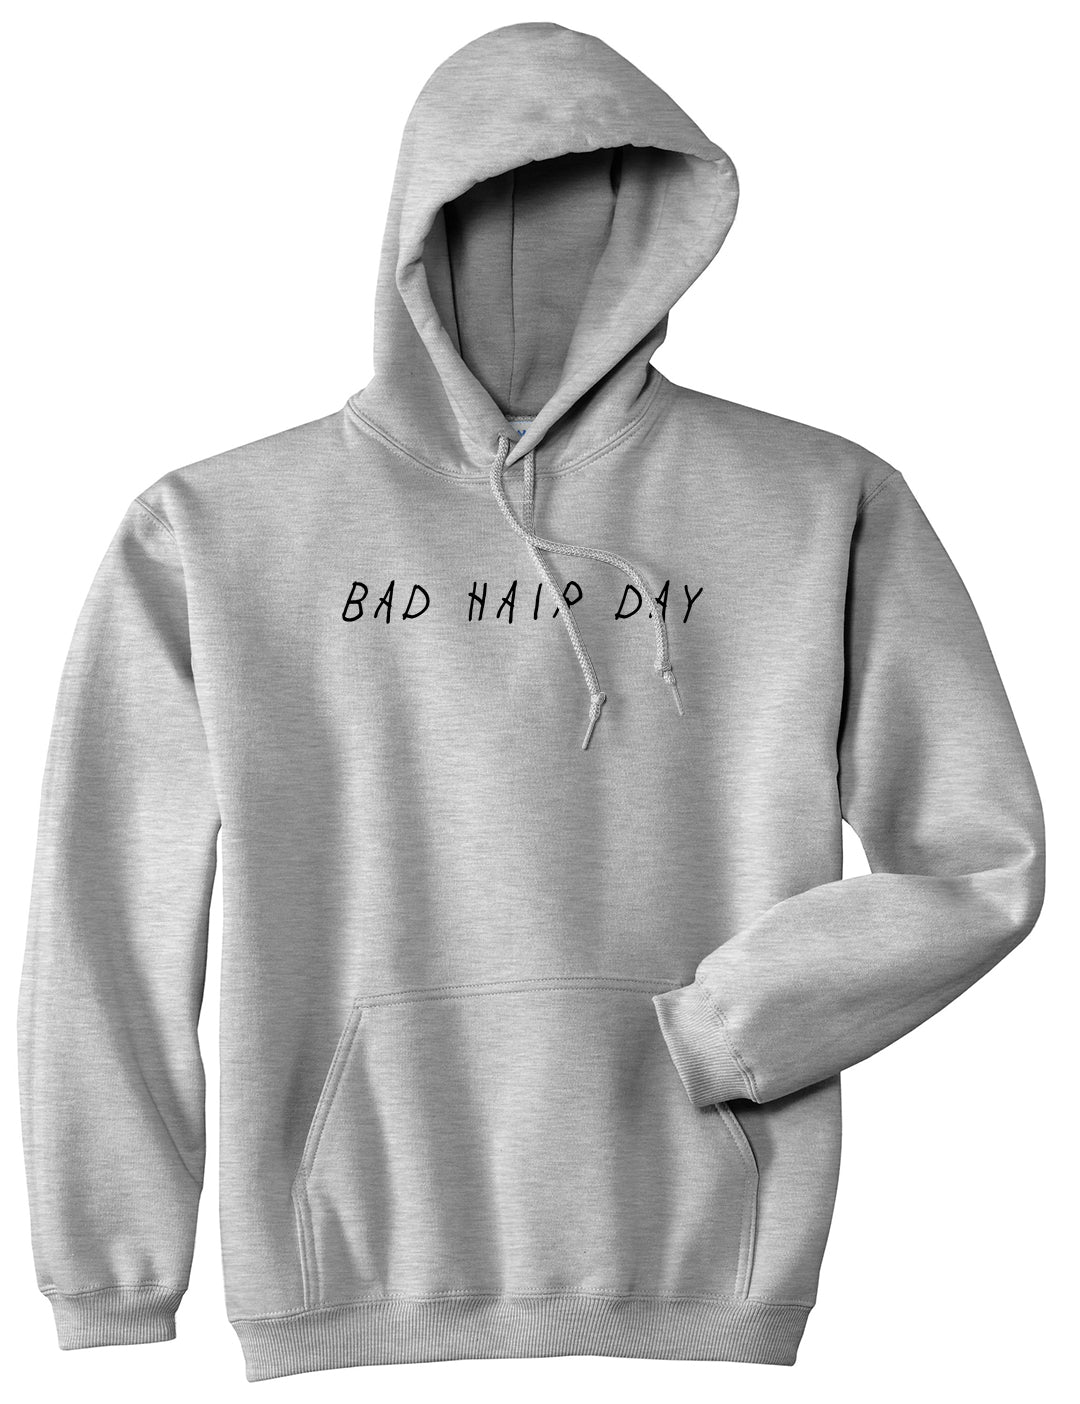 Bad Hair Day Grey Pullover Hoodie by Kings Of NY